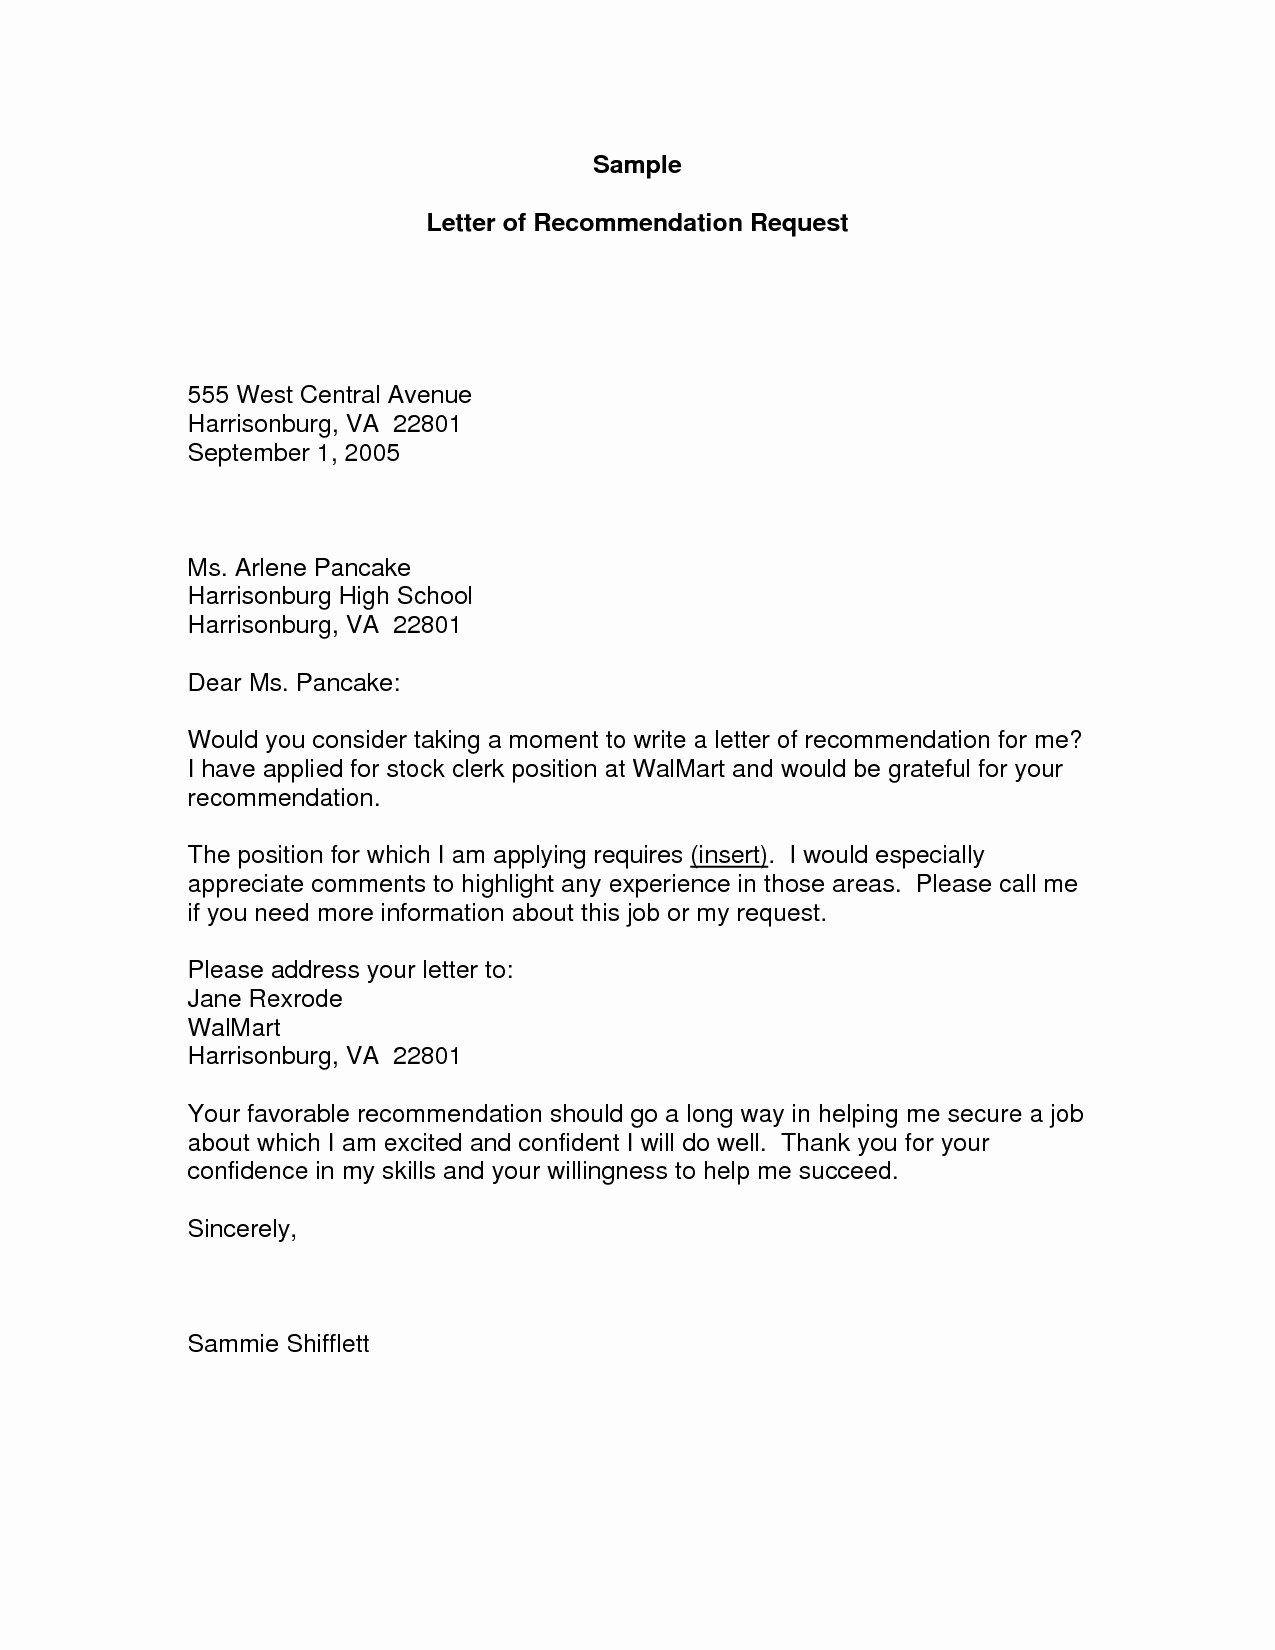 Letter Of Recommendation Request Sample Lovely A Letter Request Cover Letter Samples Cover Letter